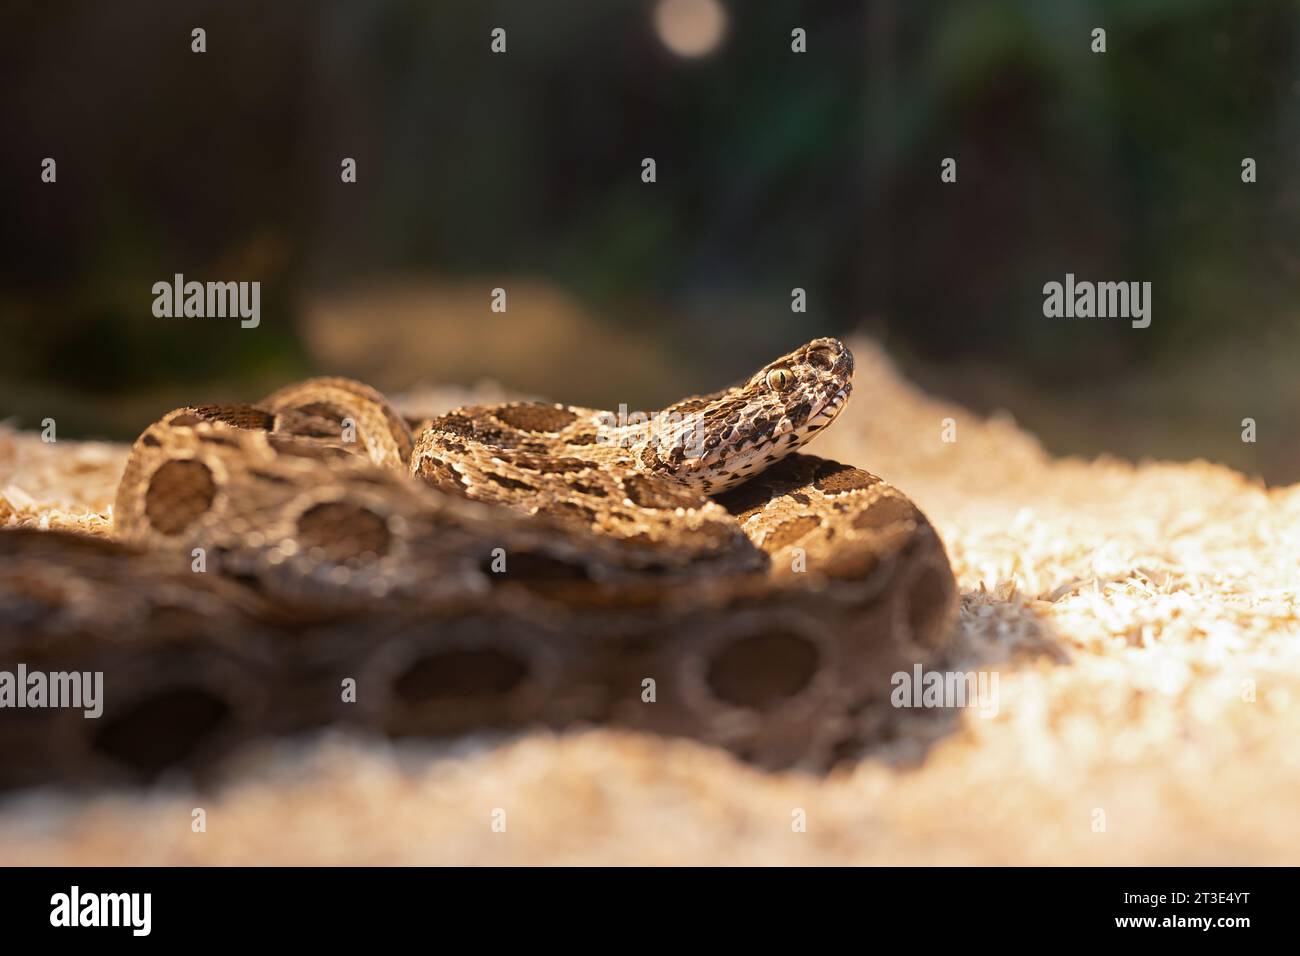 Close-up of a Siamese Russell's viper coiled on the ground. It is a snake with very strong venom. Stock Photo